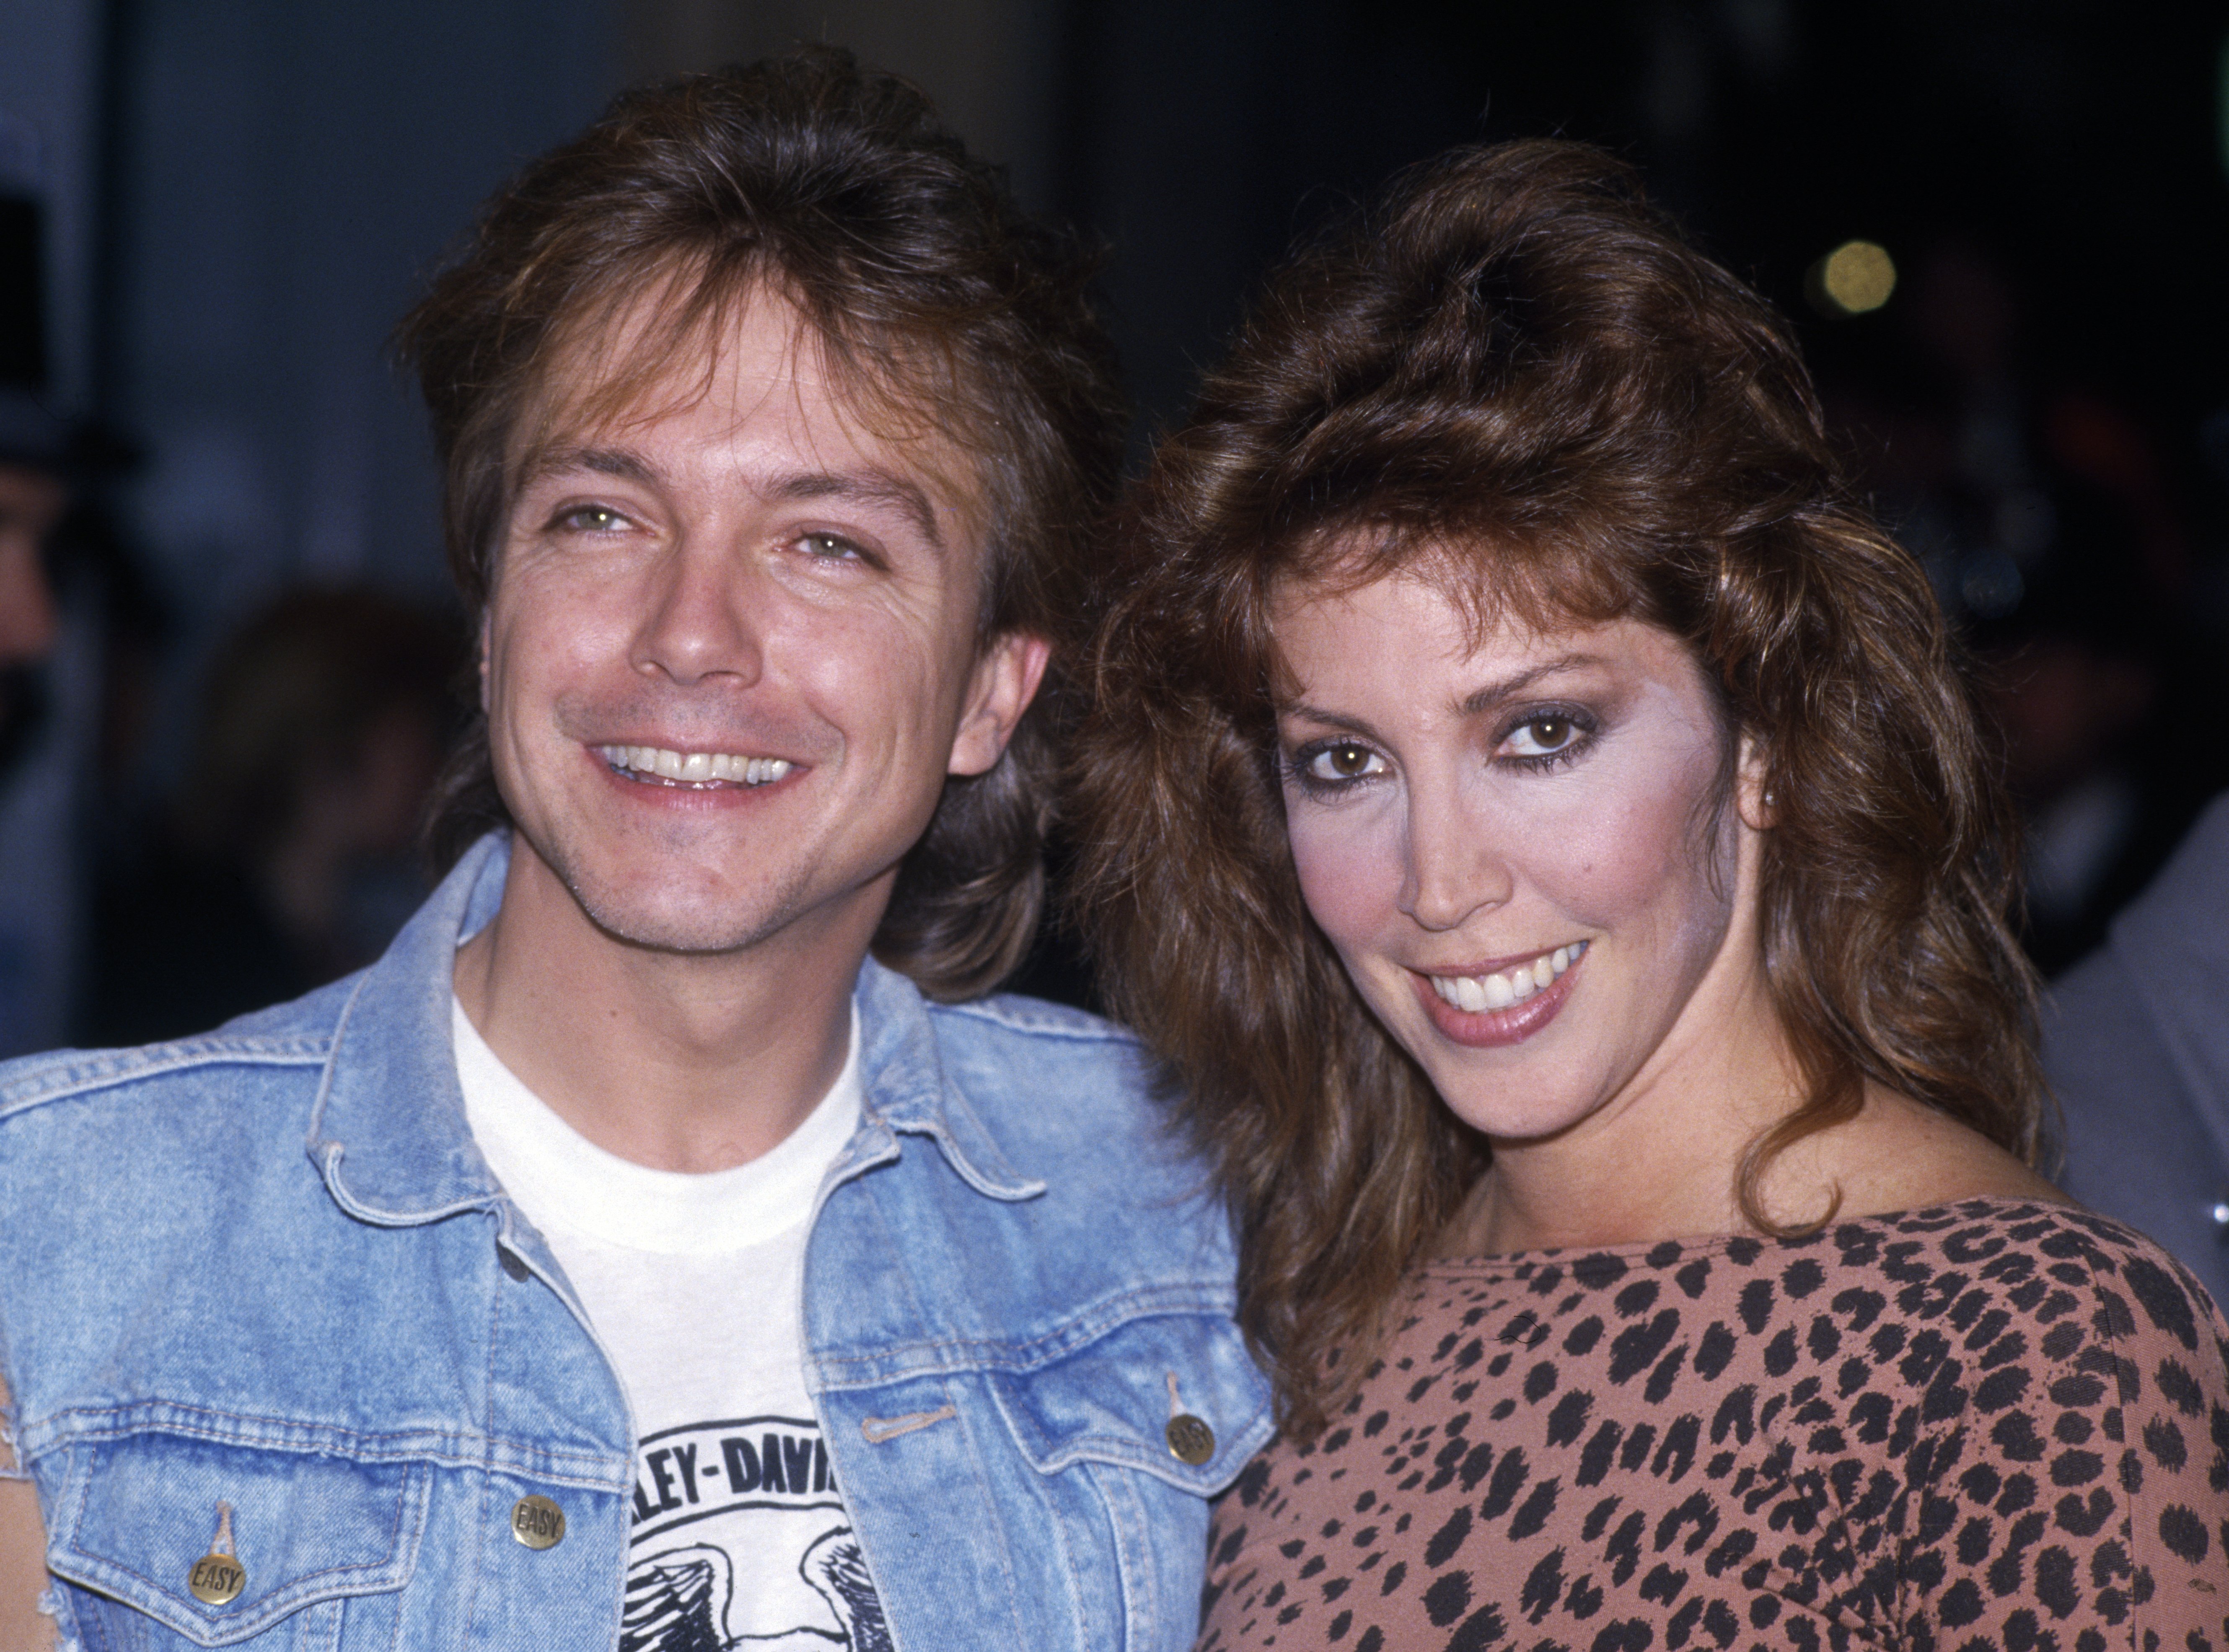 David Cassidy with his wife Sue Shifrin, circa 1993. | Source: Duncan Raban/Popperfoto/Getty Images